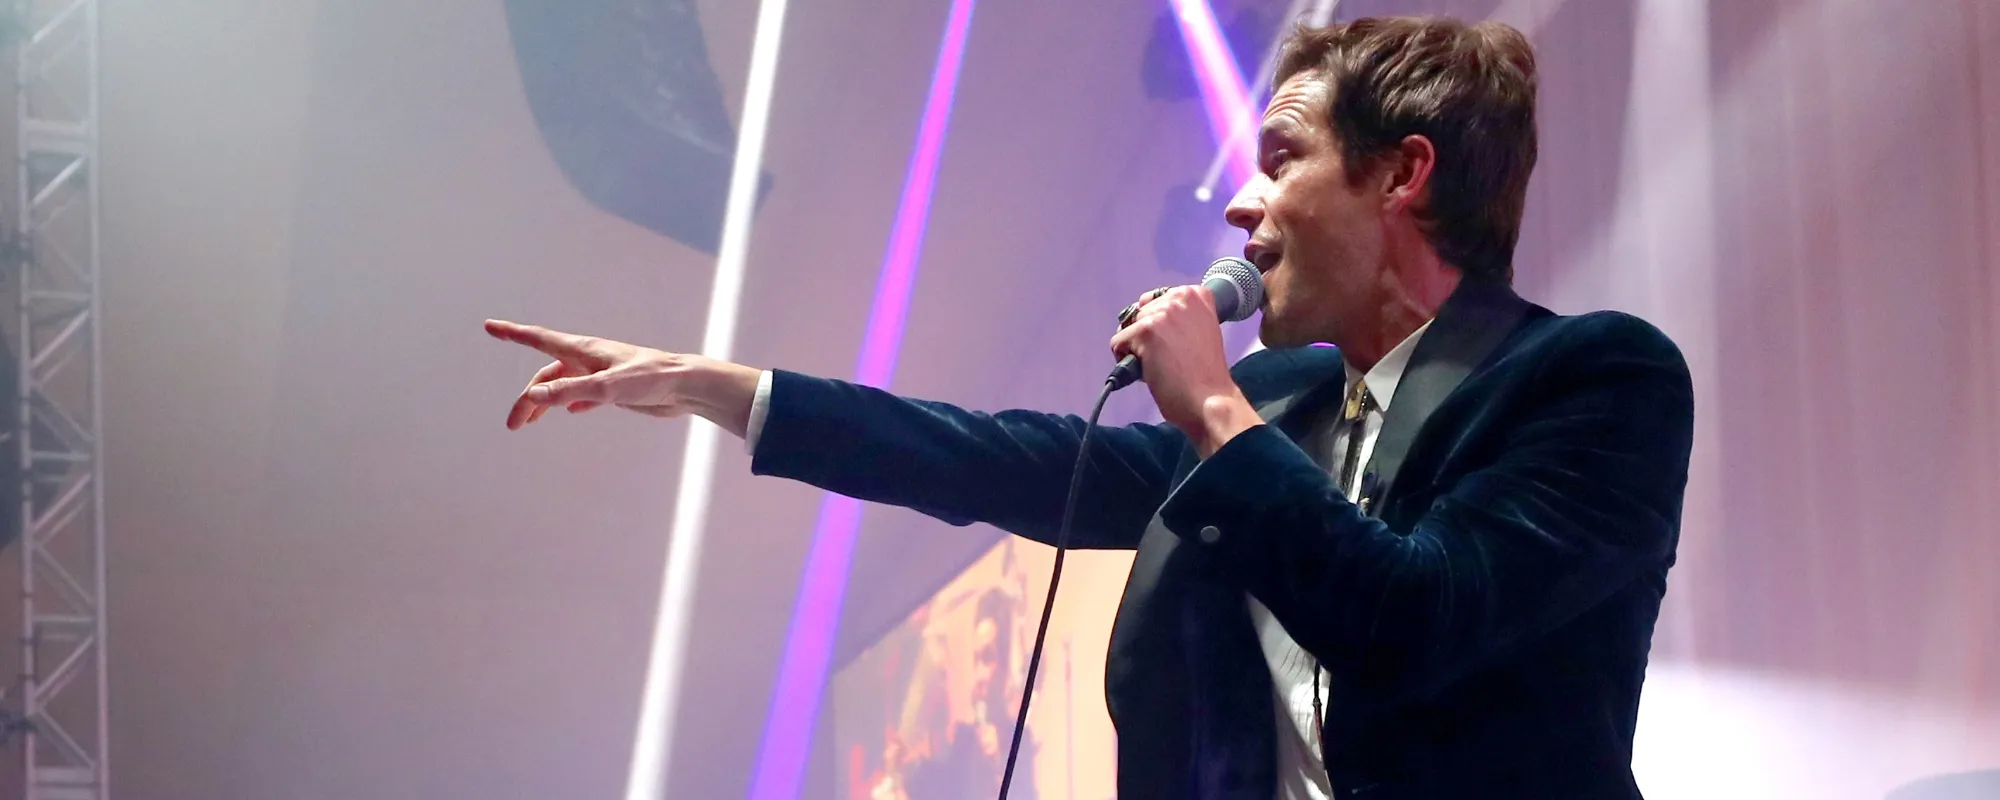 Could The Killers Be Planning ‘Hot Fuss’ 20th Anniversary Shows in 2024?